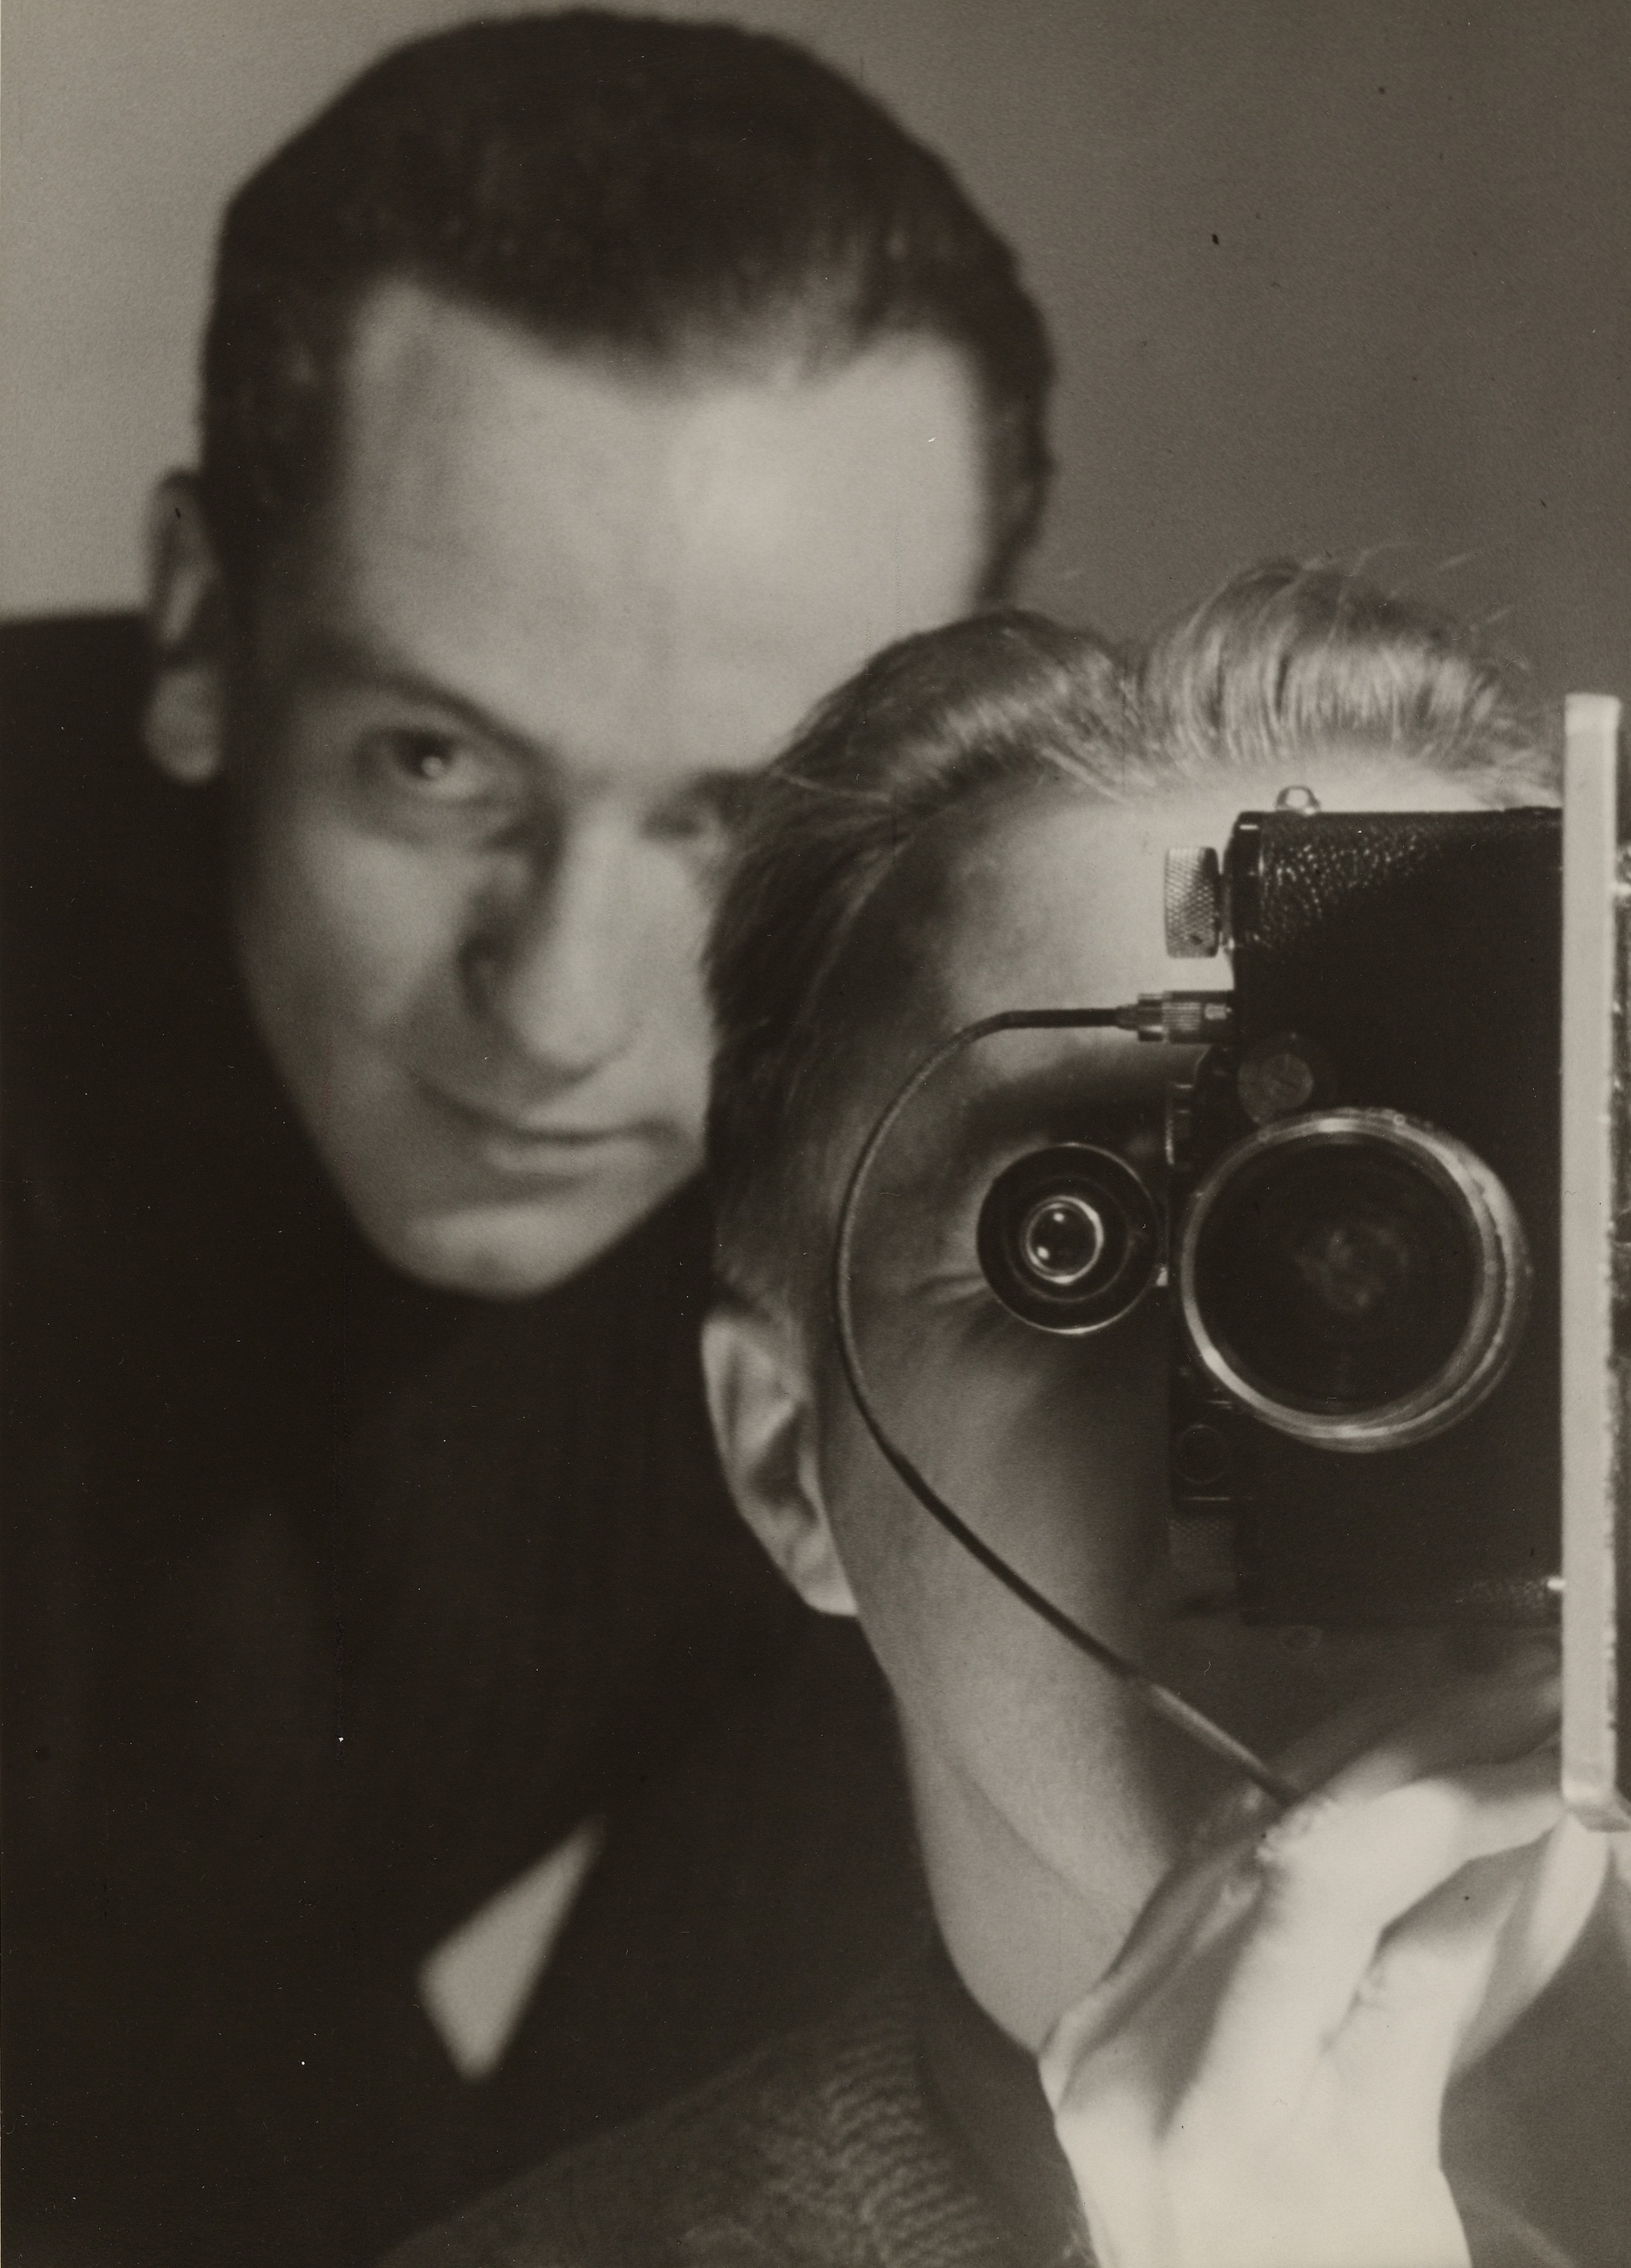 Maurice Tabard: Untitled (Self-Portrait with Roger Parry), c. 1936. Stampa alla gelatina ai sali d’argento, 23.5 x 16.8 cm. The Museum of Modern Art, New York Thomas Walther Collection. Gift of Thomas Walther Digital Image © 2021 The Museum of Modern Art, New York/Scala, Florence